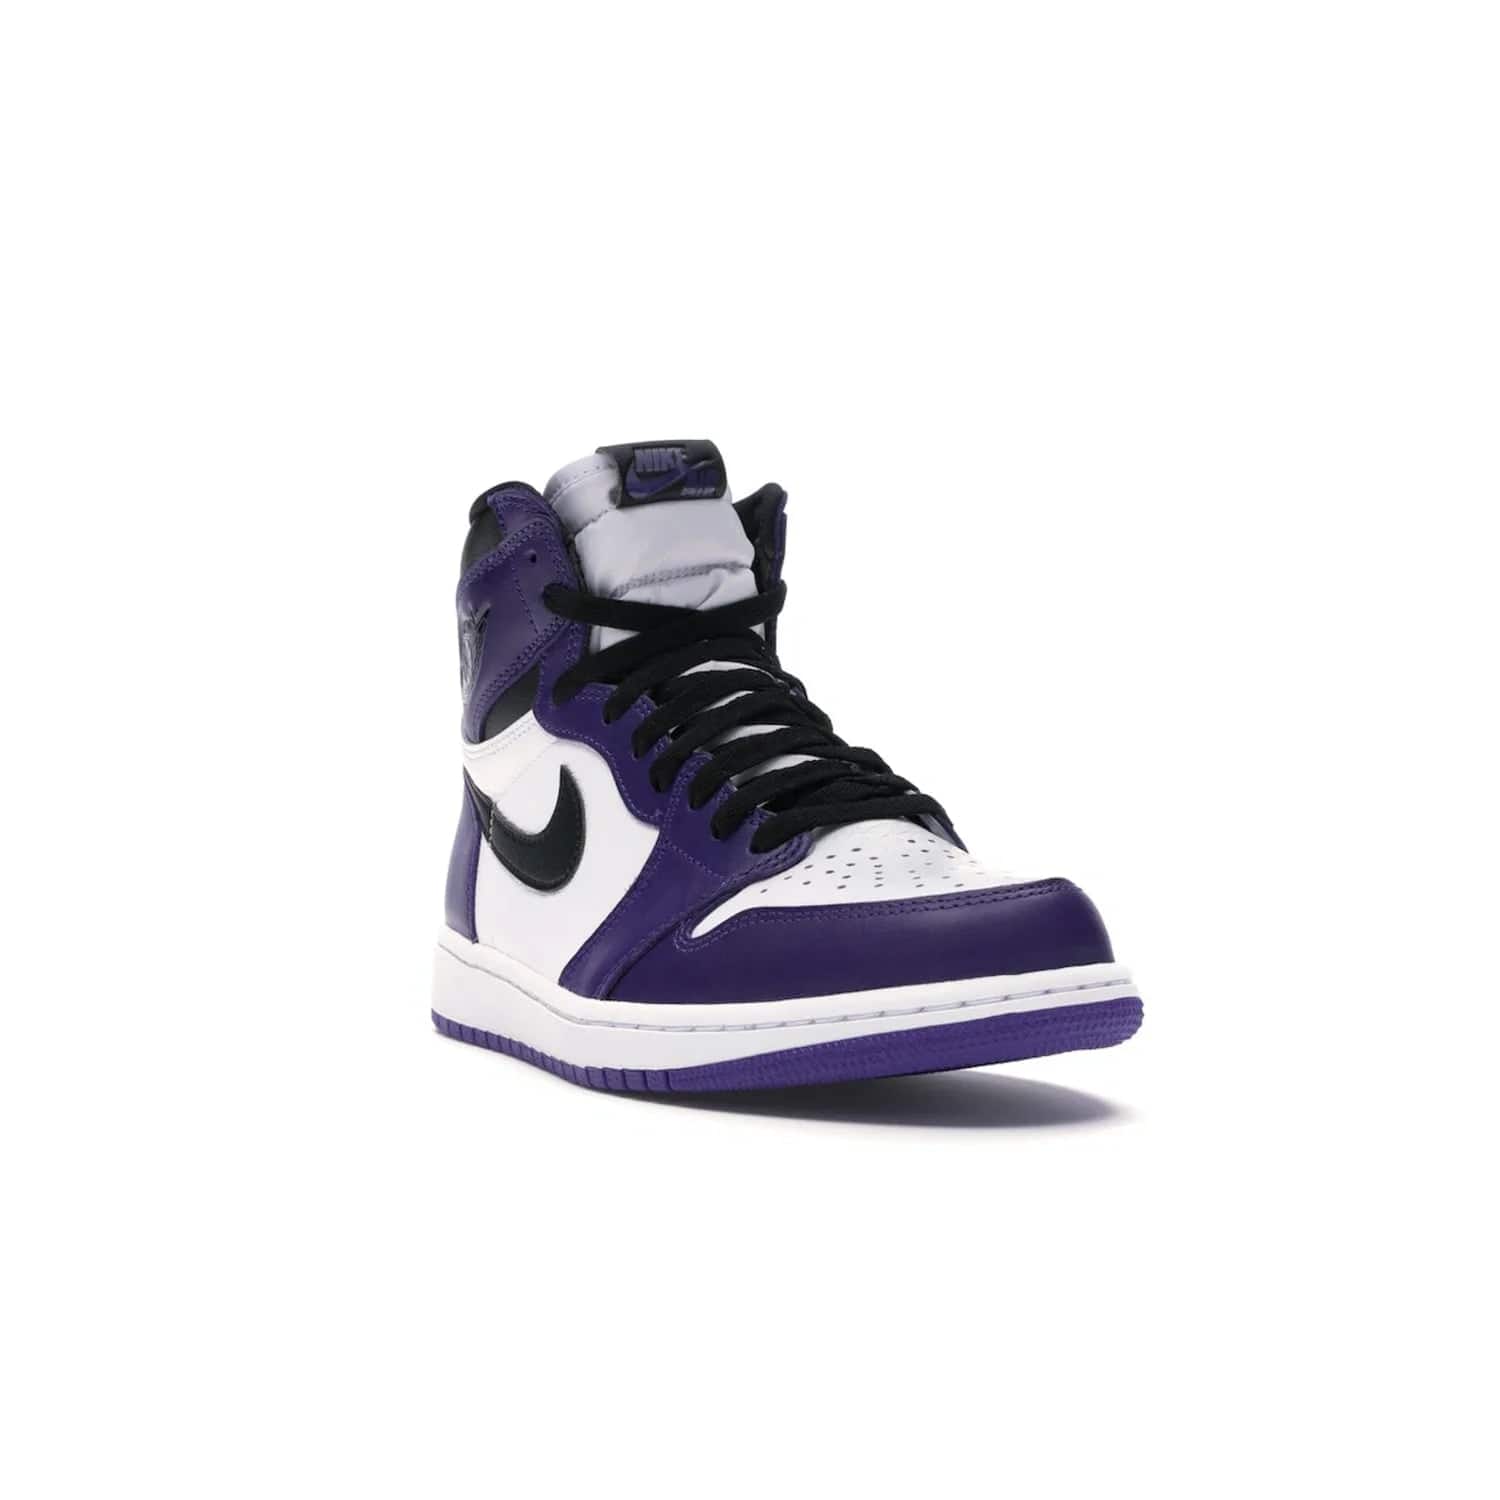 Jordan 1 Retro High Court Purple White - Image 7 - Only at www.BallersClubKickz.com - Grab the classic Jordan 1 Retro High Court Purple White and add major flavor to your collection. White leather upper with Court Purple overlays and Swoosh logo. White midsole and purple outsole. Get yours and rep your Jordan Brand.